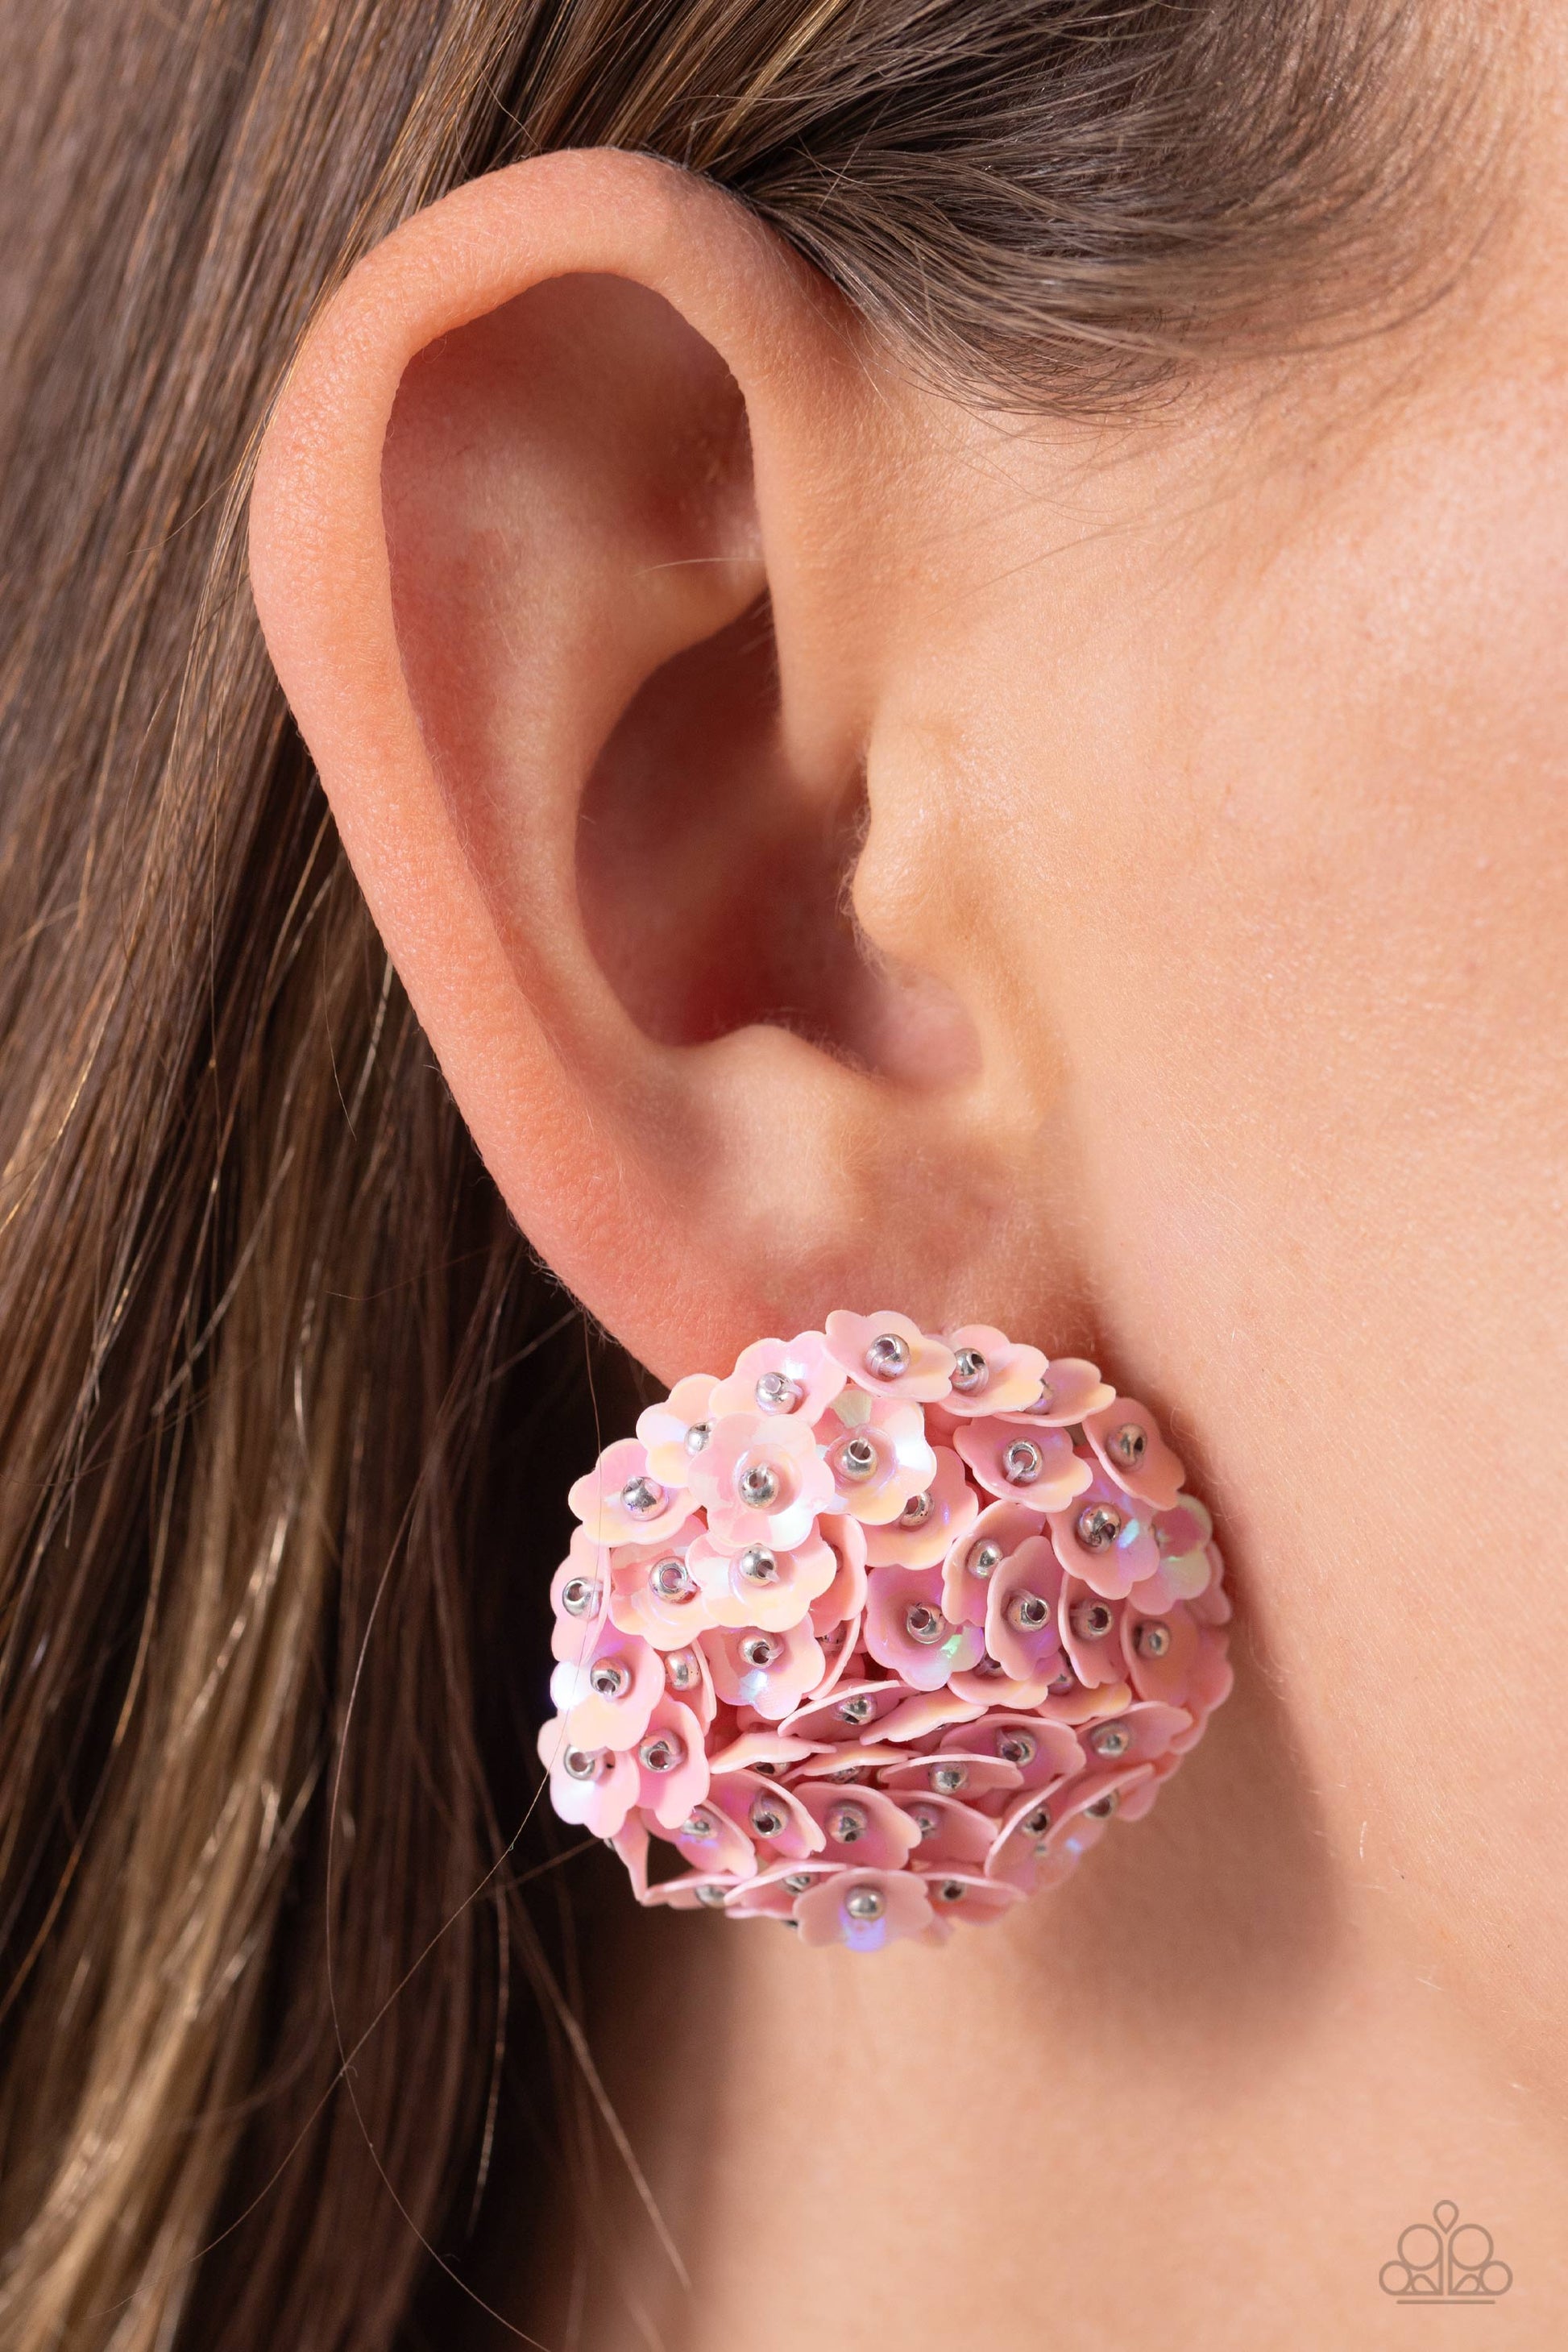 Paparazzi Accessories - Corsage Character - Pink Earrings featuring a light iridescent sheen, light pink flowers with silver stud centers explode around the ear to create a whimsical bouquet-inspired statement. Earring attaches to a standard post fitting.  Sold as one pair of post earrings.